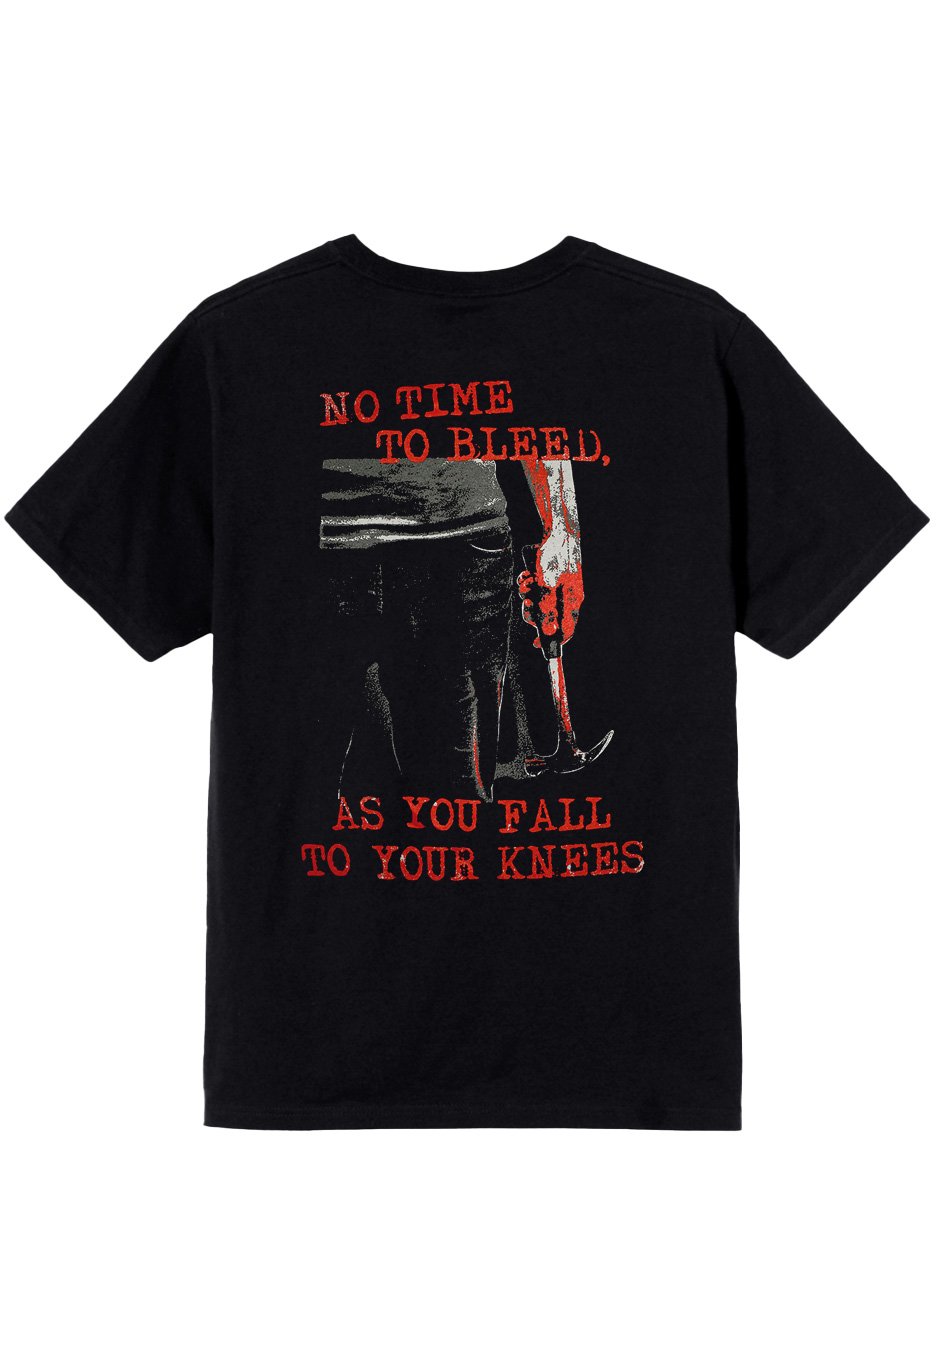 Suicide Silence - No Time To Bleed - T-Shirt